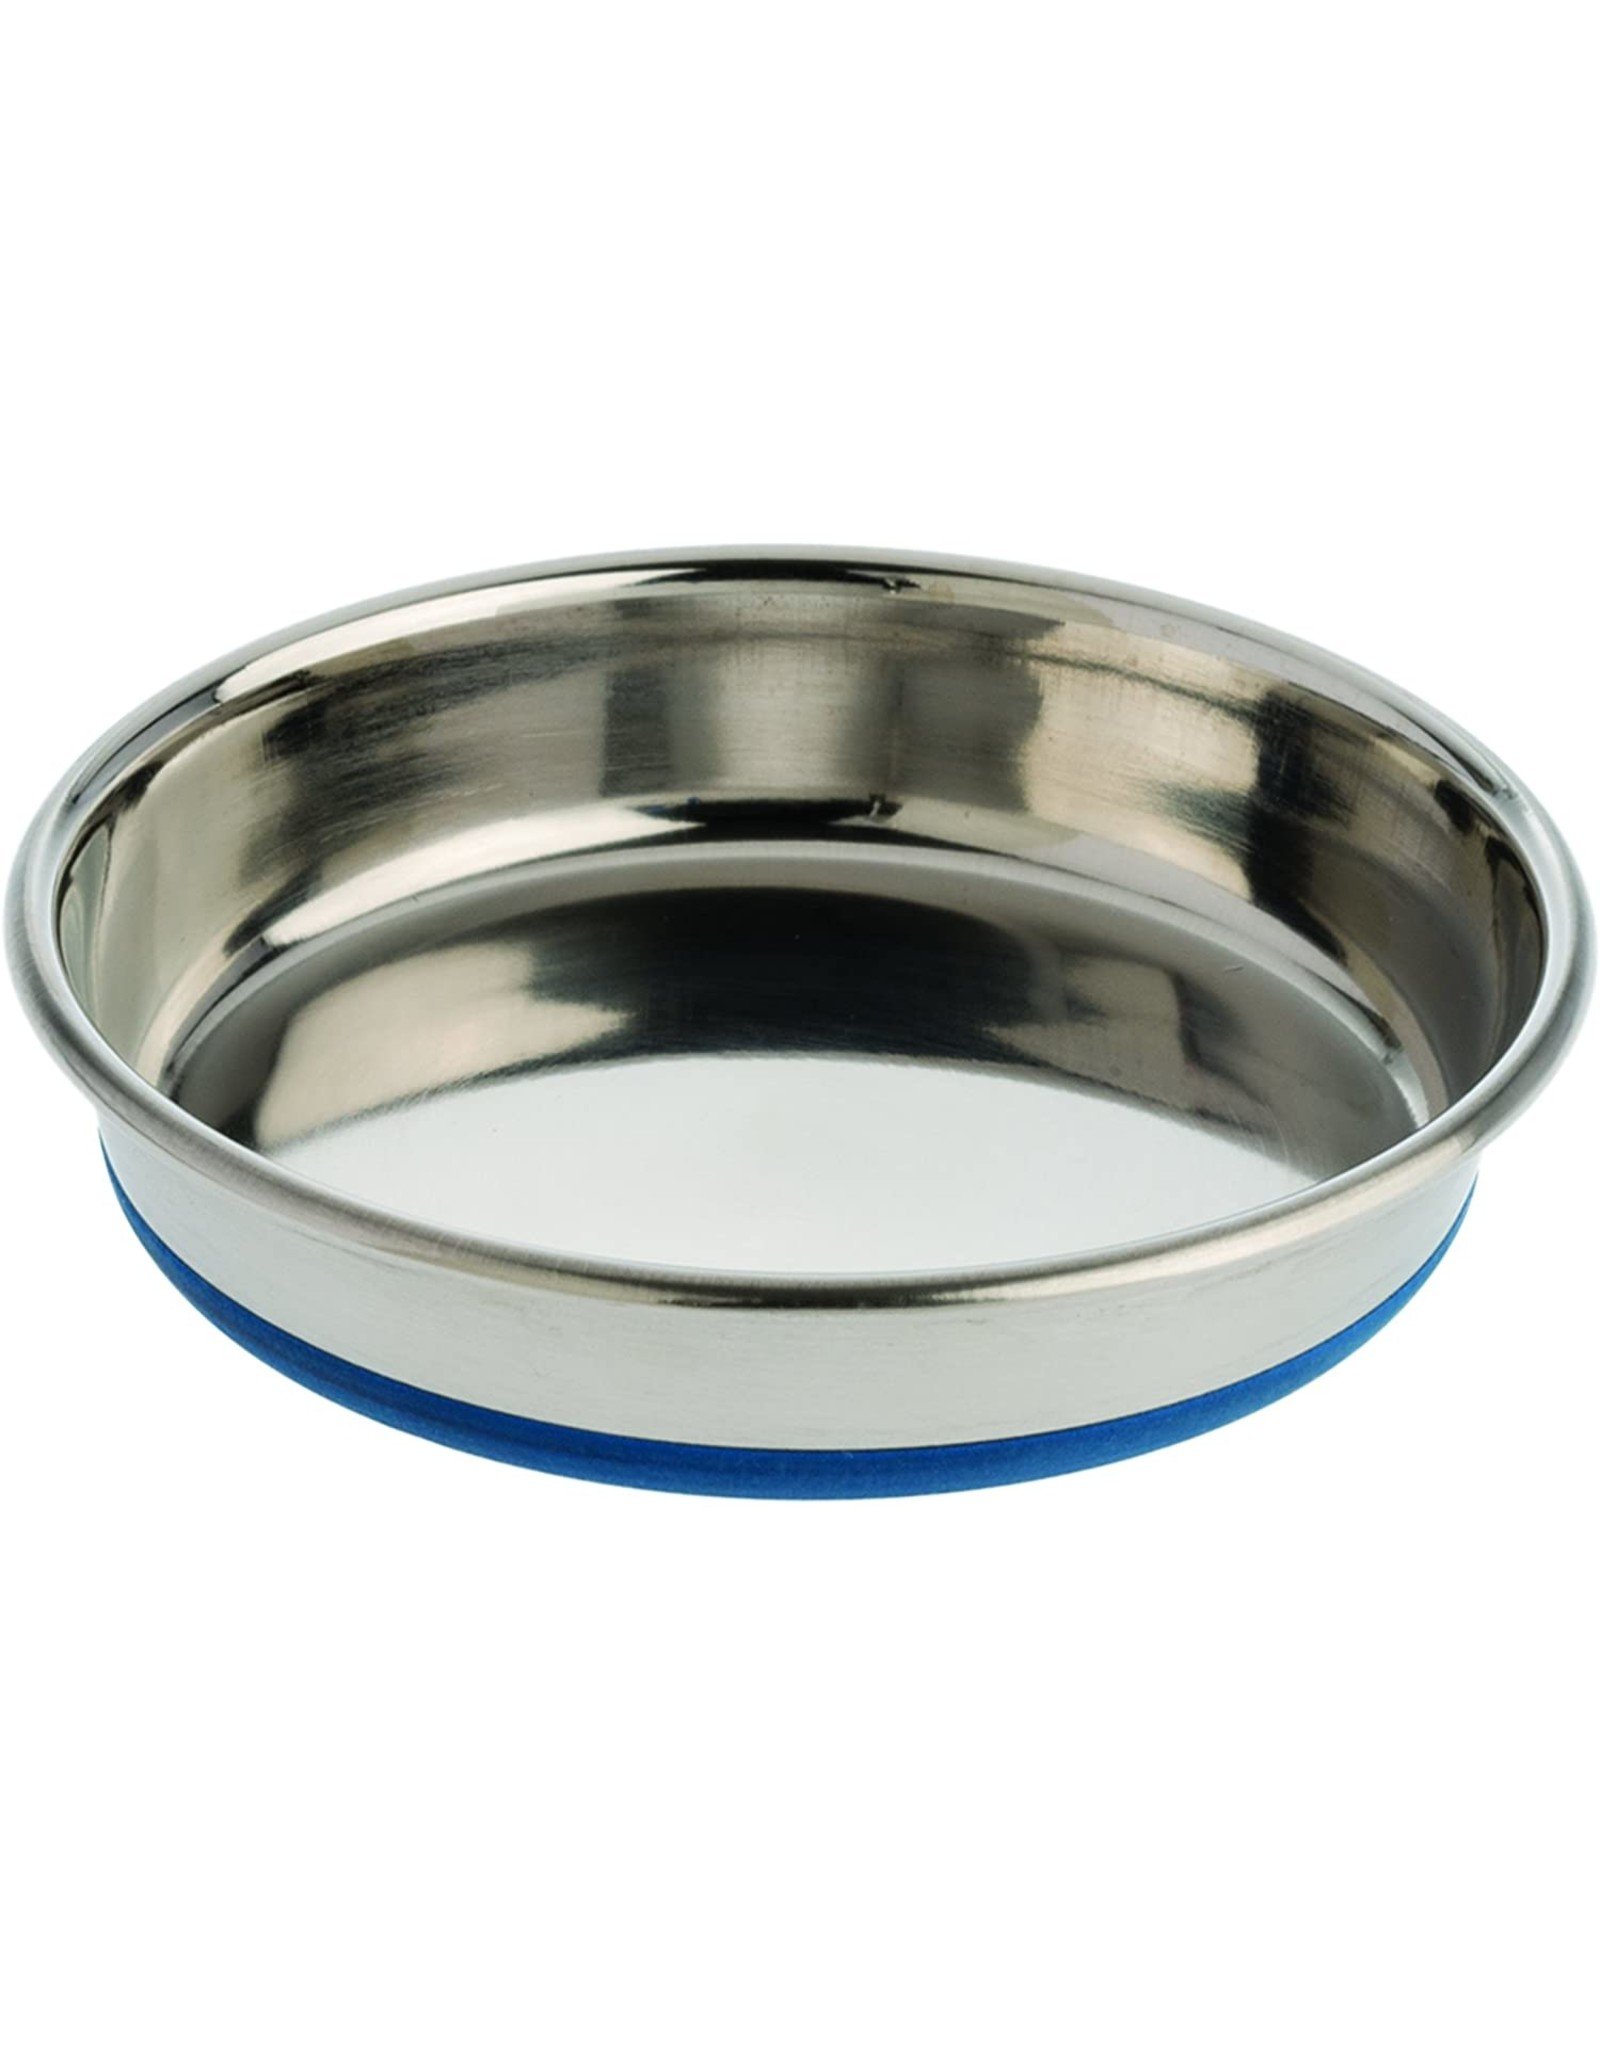 OurPets DURAPET STAINLESS STEEL CAT DISH 6OZ